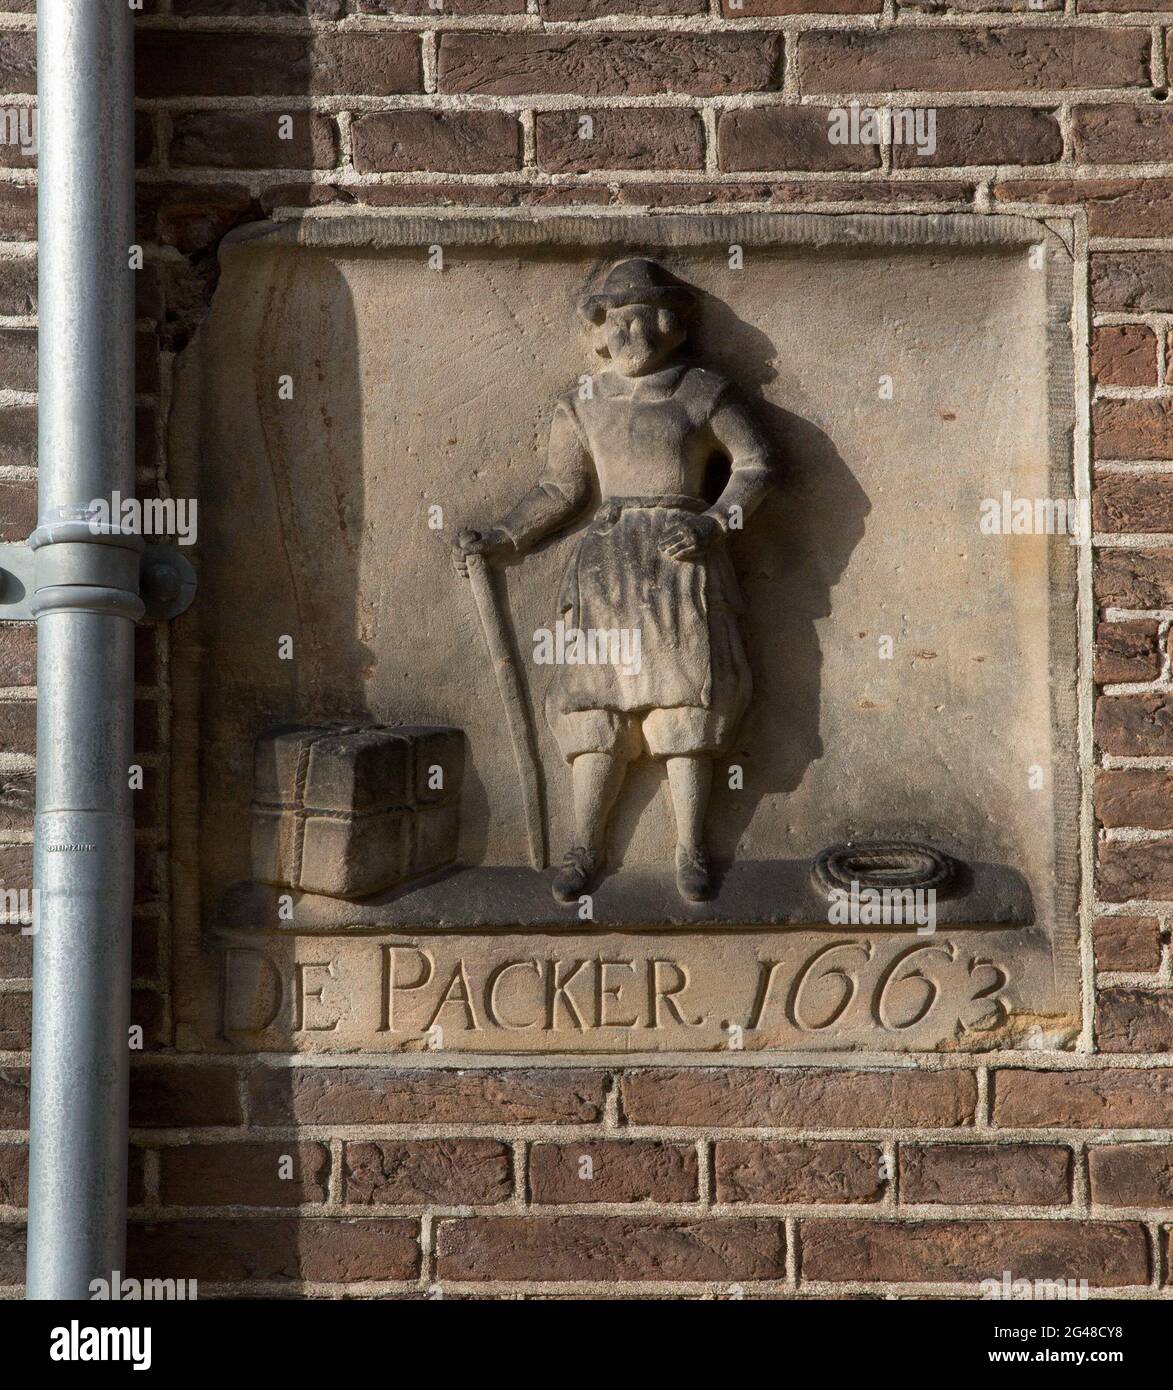 Facing brick with standing man with package and rope and inscription: the Packer 1663. A sandstone facing brick on which: the pinker 1663, and a standing man with a suit and a rope beside him. Stock Photo